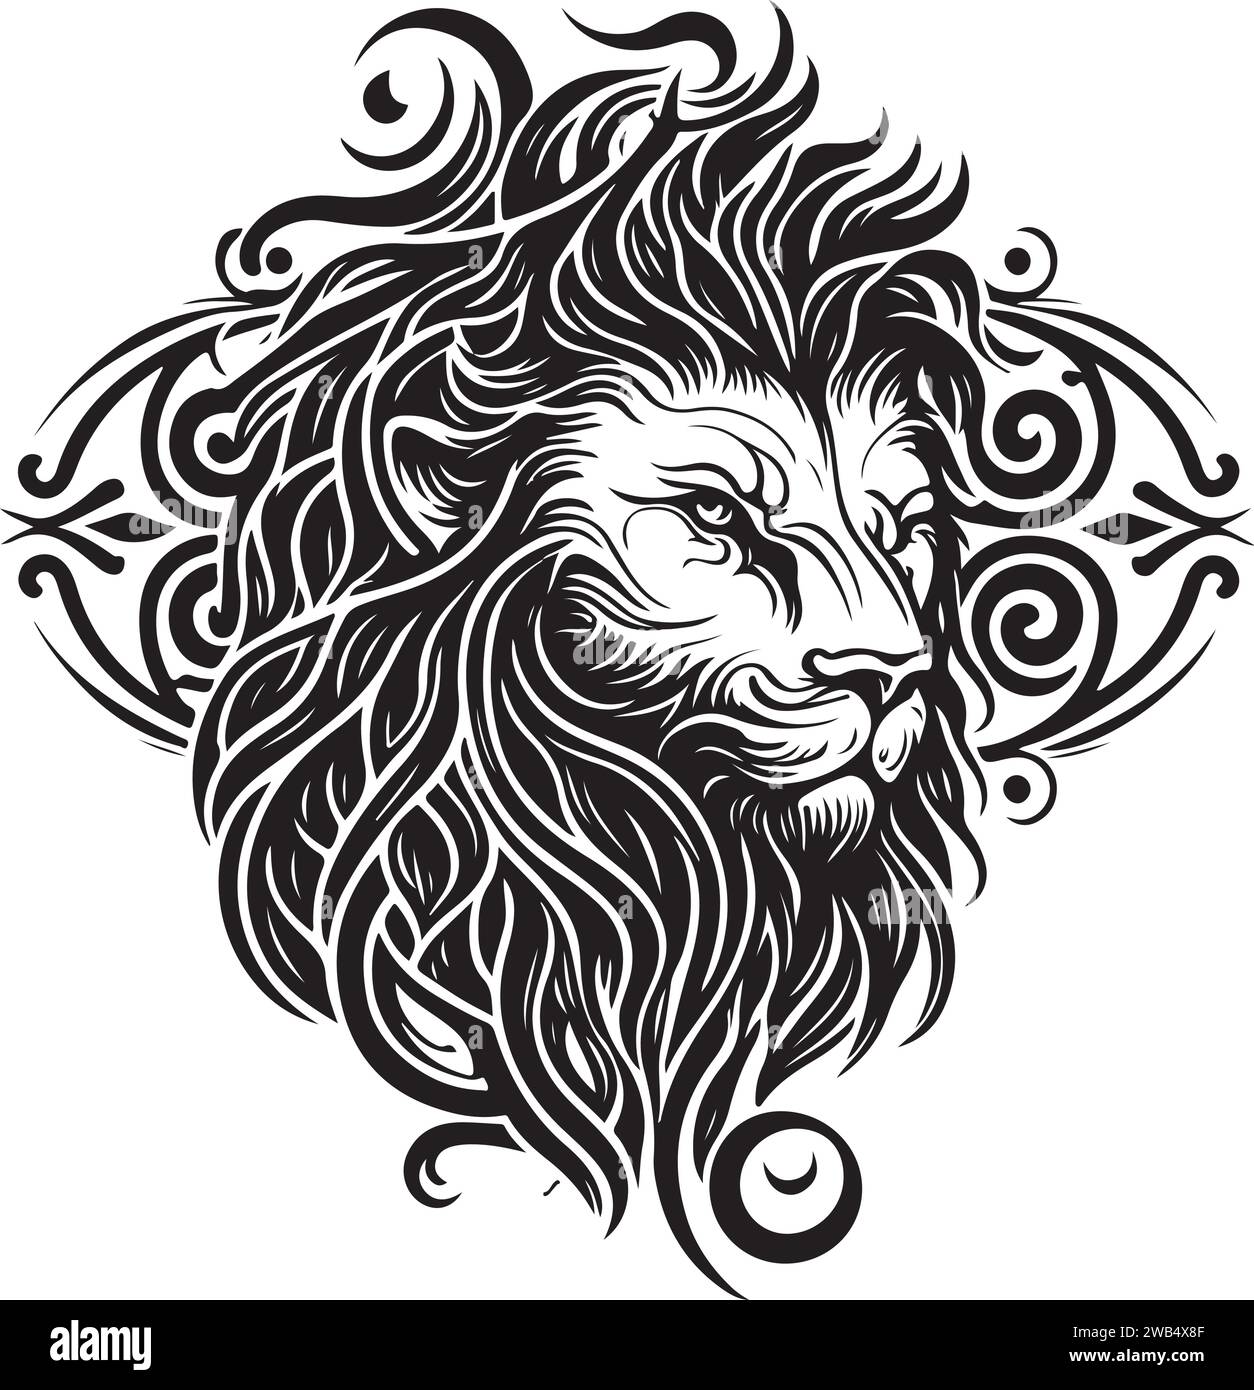 Lion ethnic graphic style with celtic ornaments and patterned mane. Vector illustration. Stock Vector